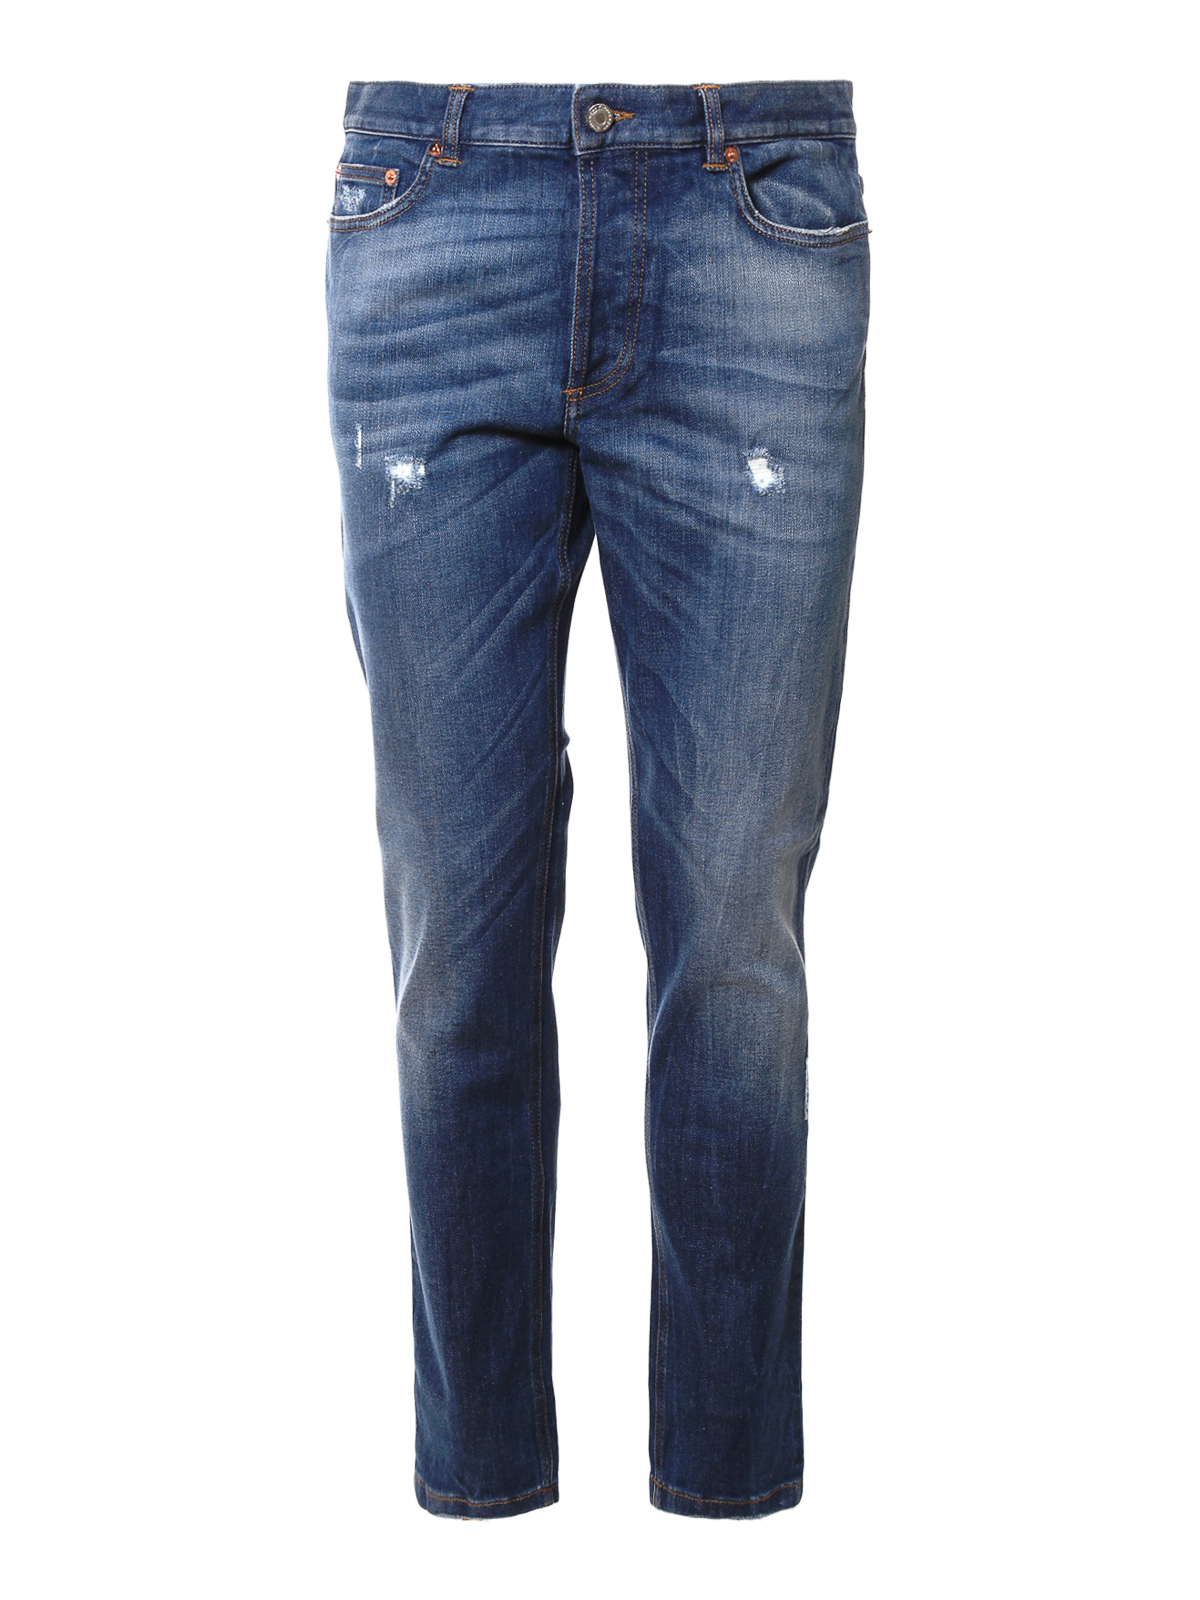 Straight Leg Jeans Givenchy - Straight Leg Jeans - Light Wash ...